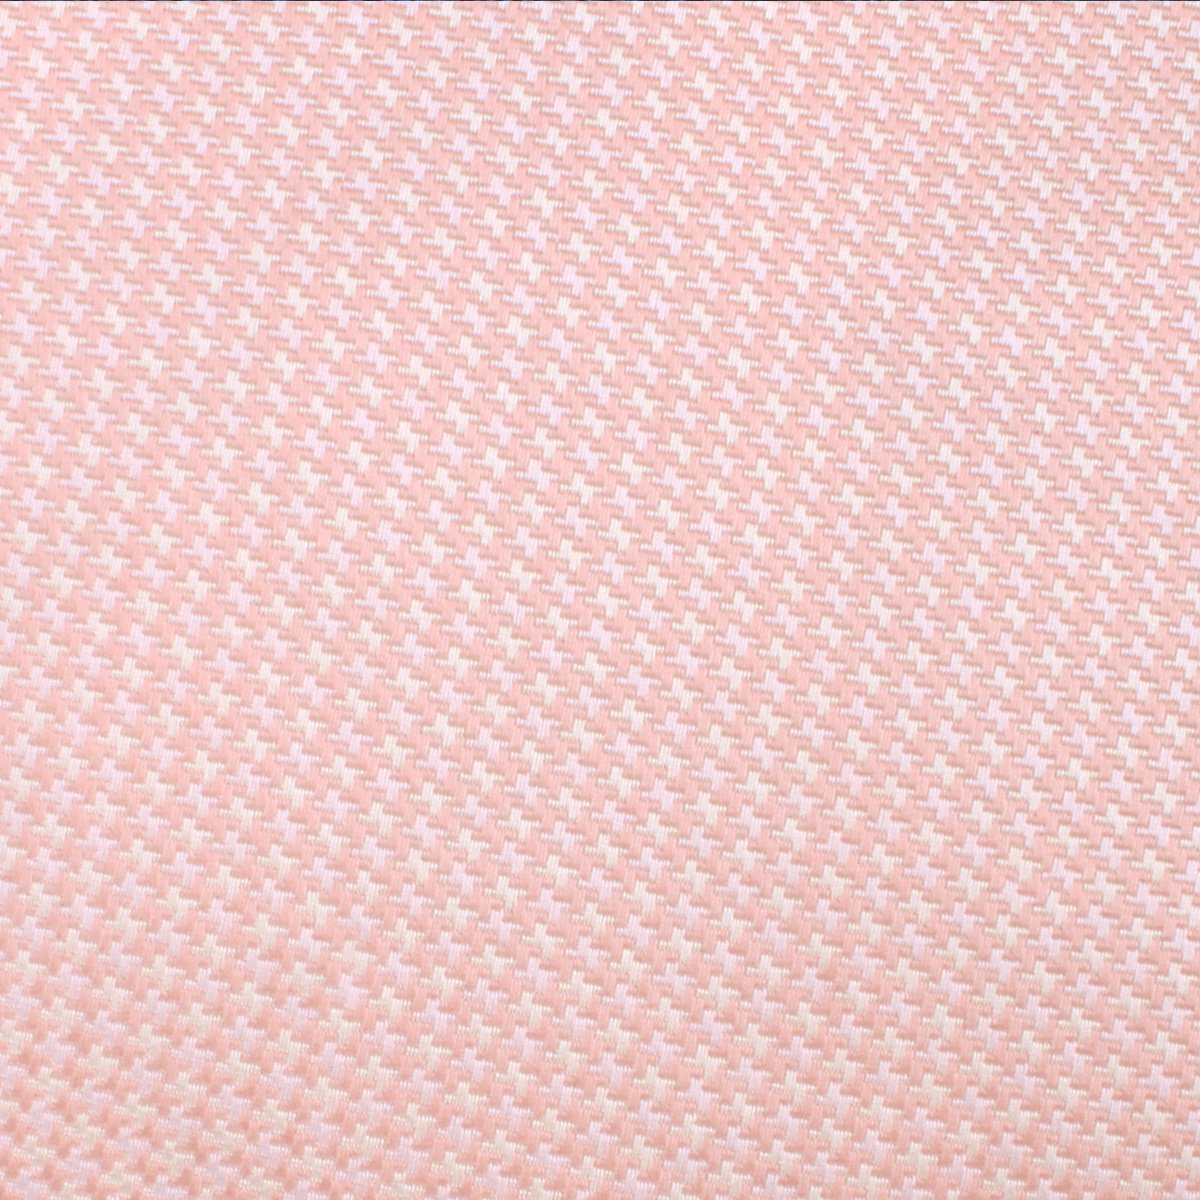 Blush Pink Houndstooth Pocket Square Fabric